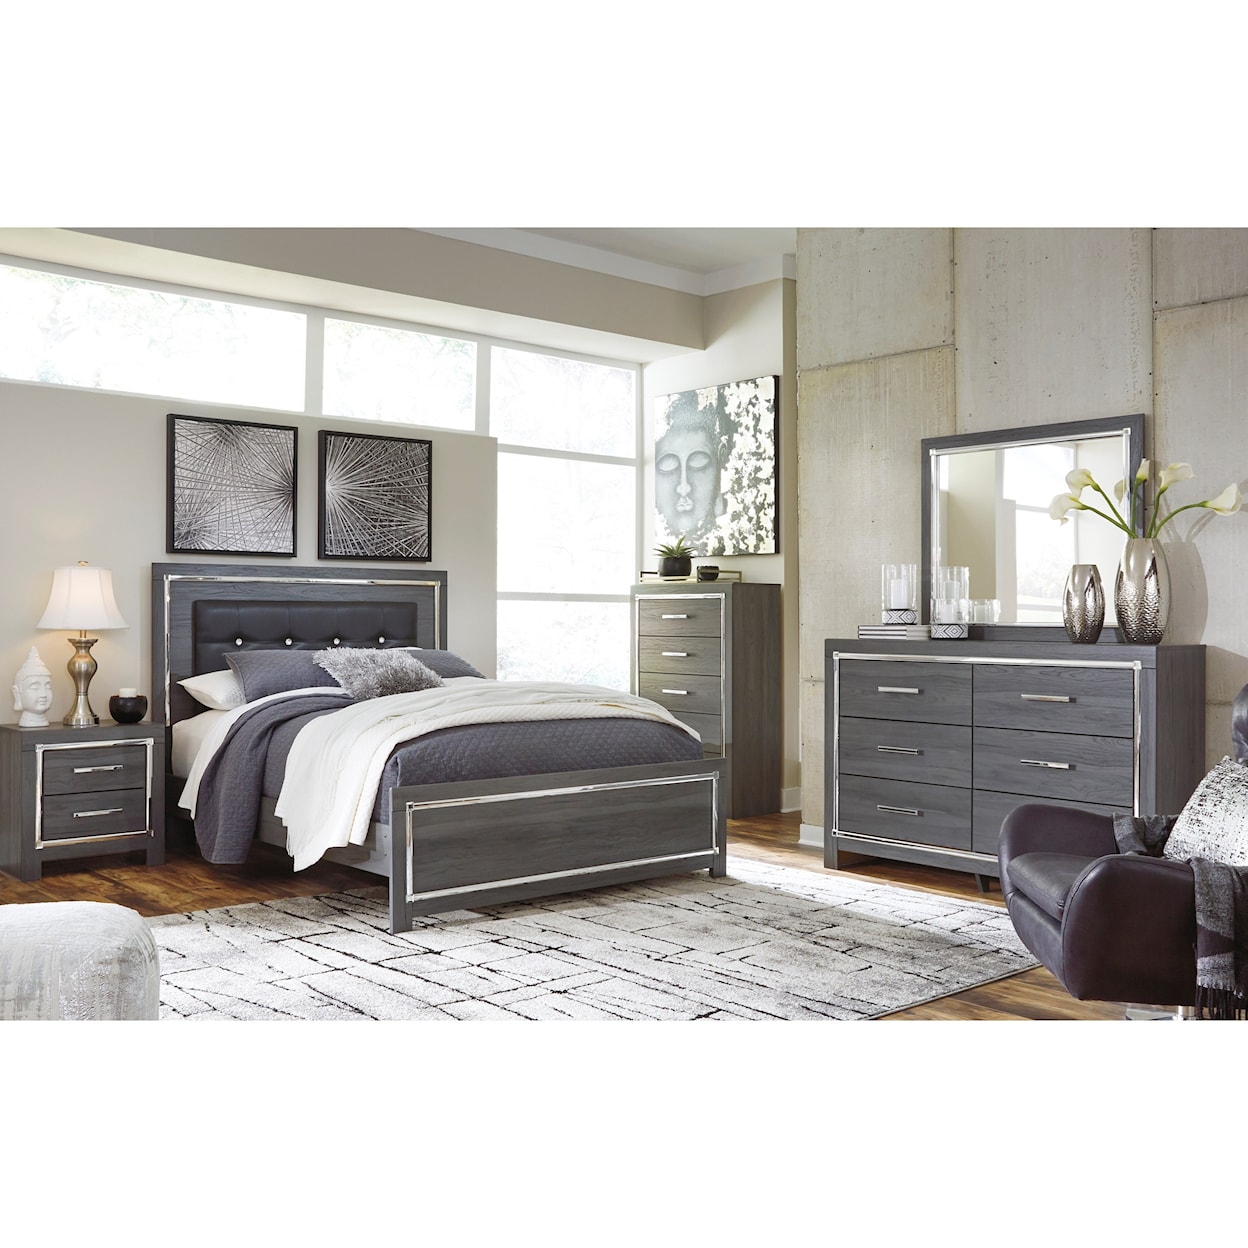 Signature Design by Ashley Lodanna Queen 5-PC Bedroom Group